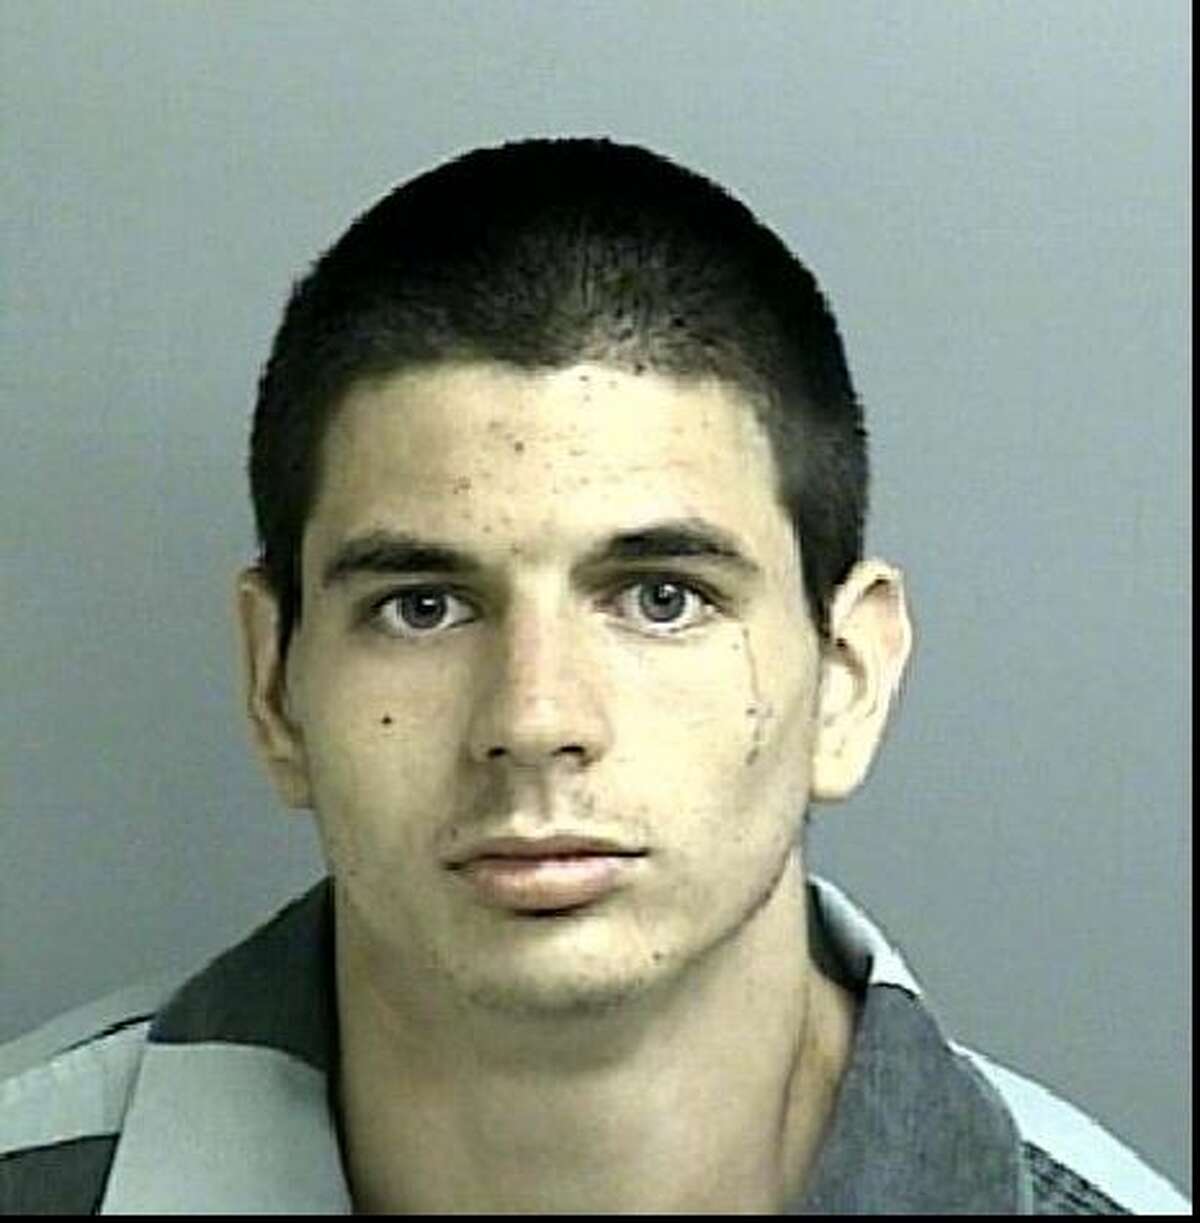 Montgomery County SheriffÂ?’s Office investigators are looking for Joshua Lee Villagomez, 22, who is accused of stabbing Johnny Leon Hodum Jr. in the 11400 block of Underwood Street in the Walnut Cove neighborhood off Calvary Road. Hodum was found in the back seat of a vehicle at that address with a stab wound. Detectives identified Villagomez as the suspect, and a judge signed off on an arrest warrant. He is described as a white male, standing 6 feet 1 inch tall and weighing approximately 160 pounds. He has dark hair and a tattoo of a rosary with a teardrop on his left cheekbone. If located, please contact the Montgomery County SheriffÂ?’s Office at 936-760-5800, or Montgomery County Crime Stoppers at 800-392-STOP (7867) and refer to case 17A232574.